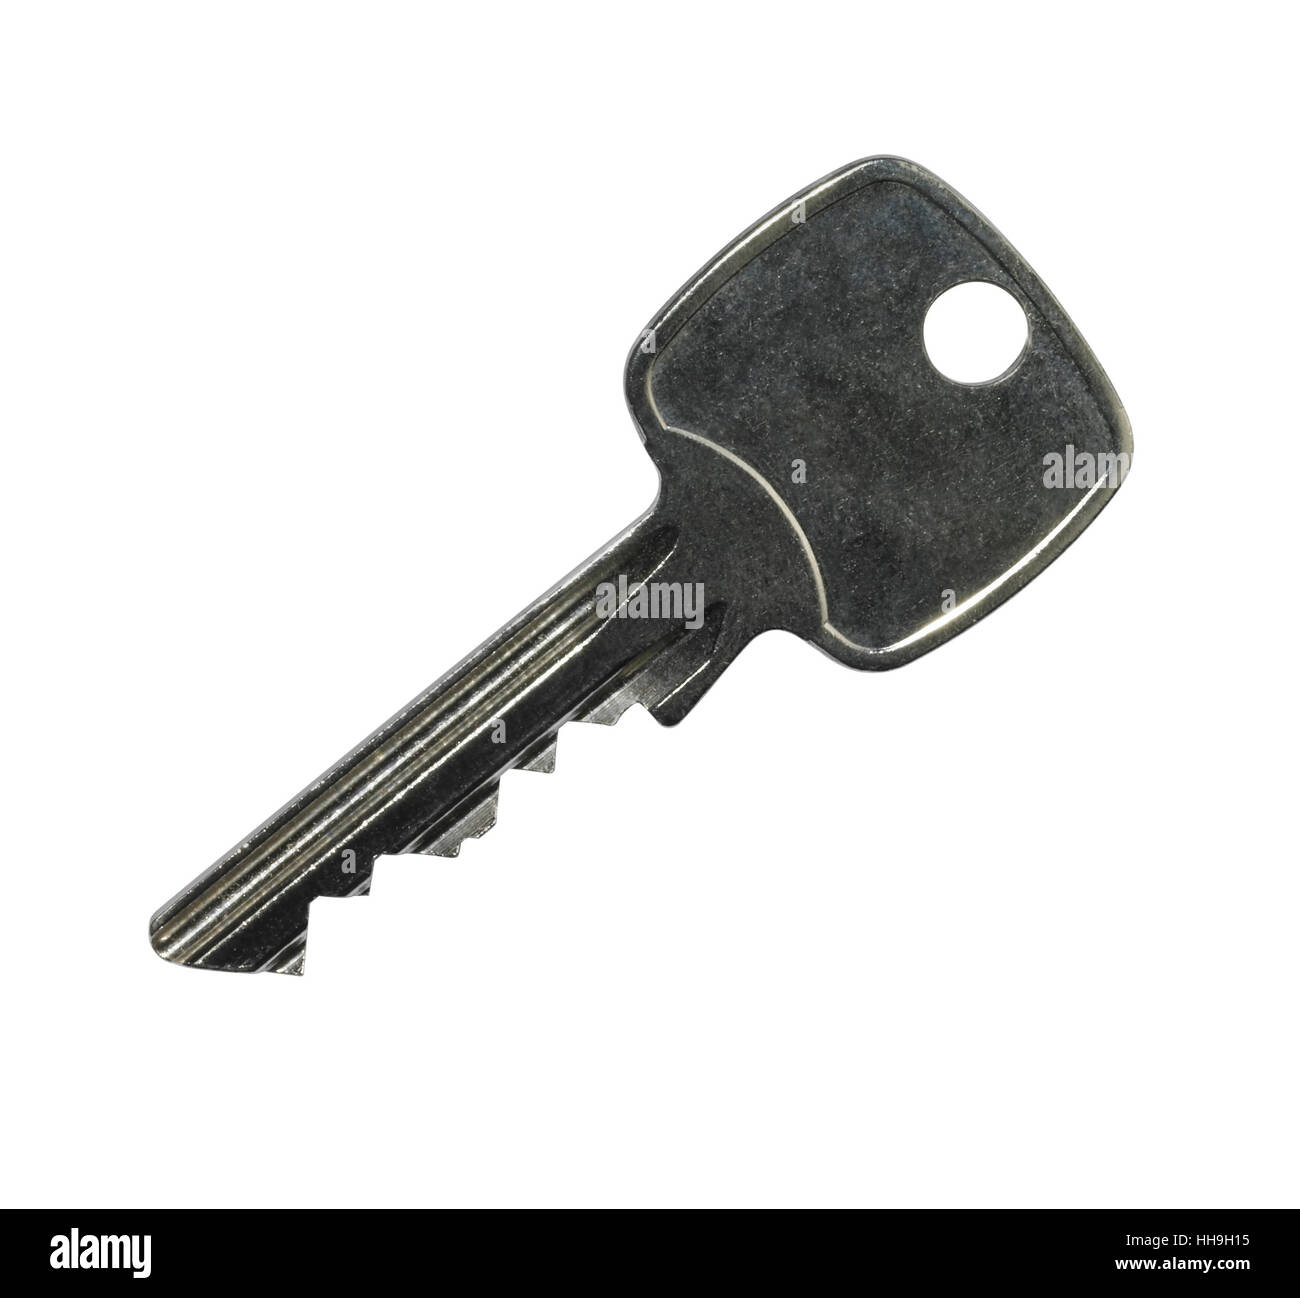 studio photography of a old key isolated on white with clipping path Stock Photo